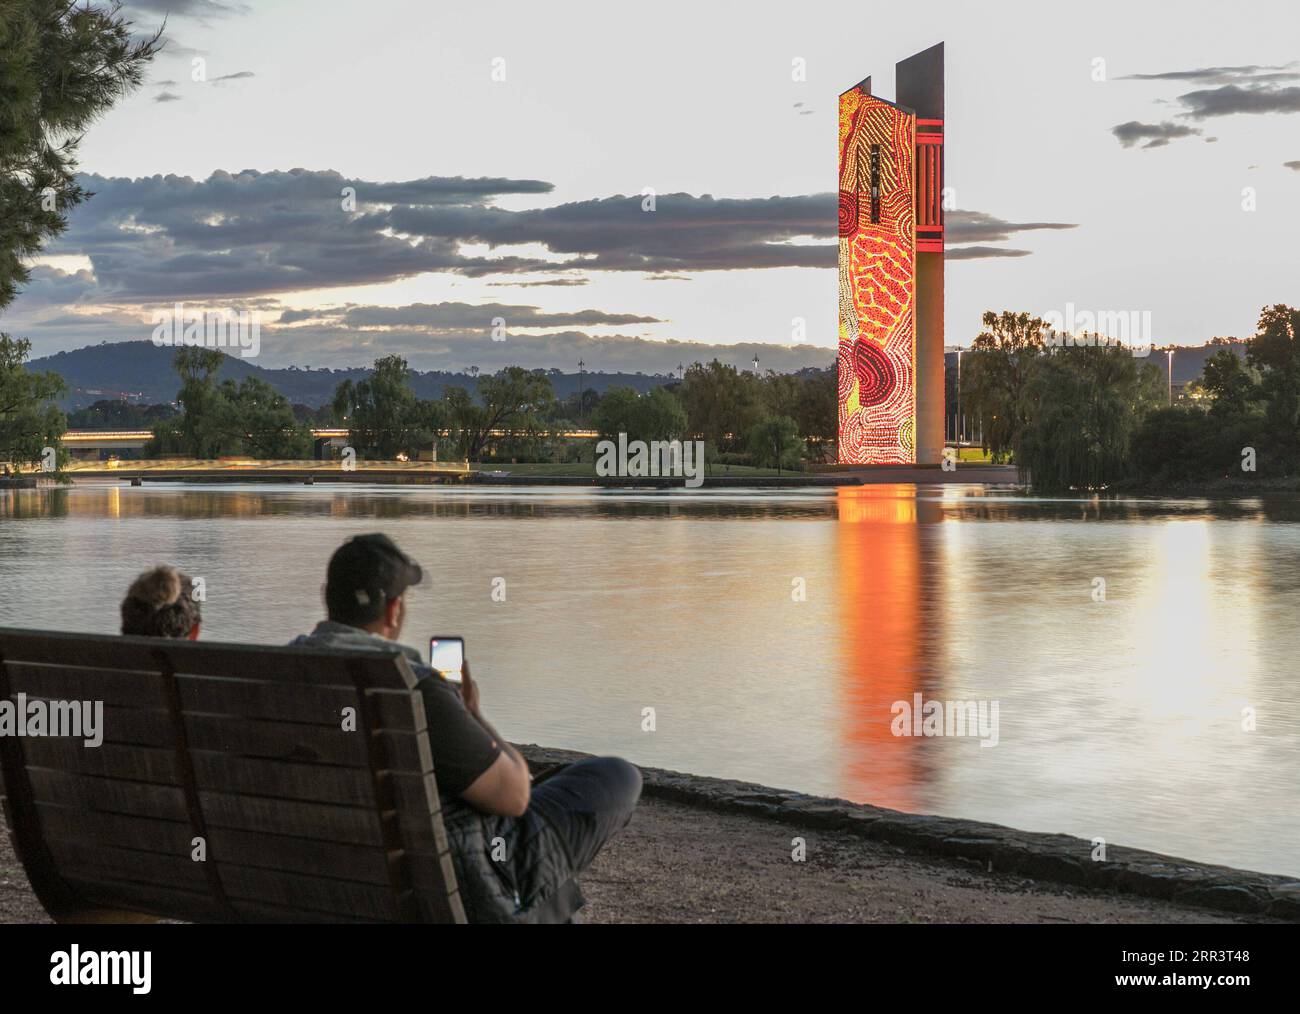 201111 -- CANBERRA, Nov. 11, 2020 -- People watch the light projections on the National Carillon in Canberra, Australia, Nov. 10, 2020. The National Carillon is illuminated with a series of indigenous artworks and designs from Aboriginal and Torres Strait Islander artists from Nov. 8 to 15. Photo by /Xinhua AUSTRALIA-CANBERRA-NATIONAL CARILLON-PROJECTIONS LiuxChangchang PUBLICATIONxNOTxINxCHN Stock Photo